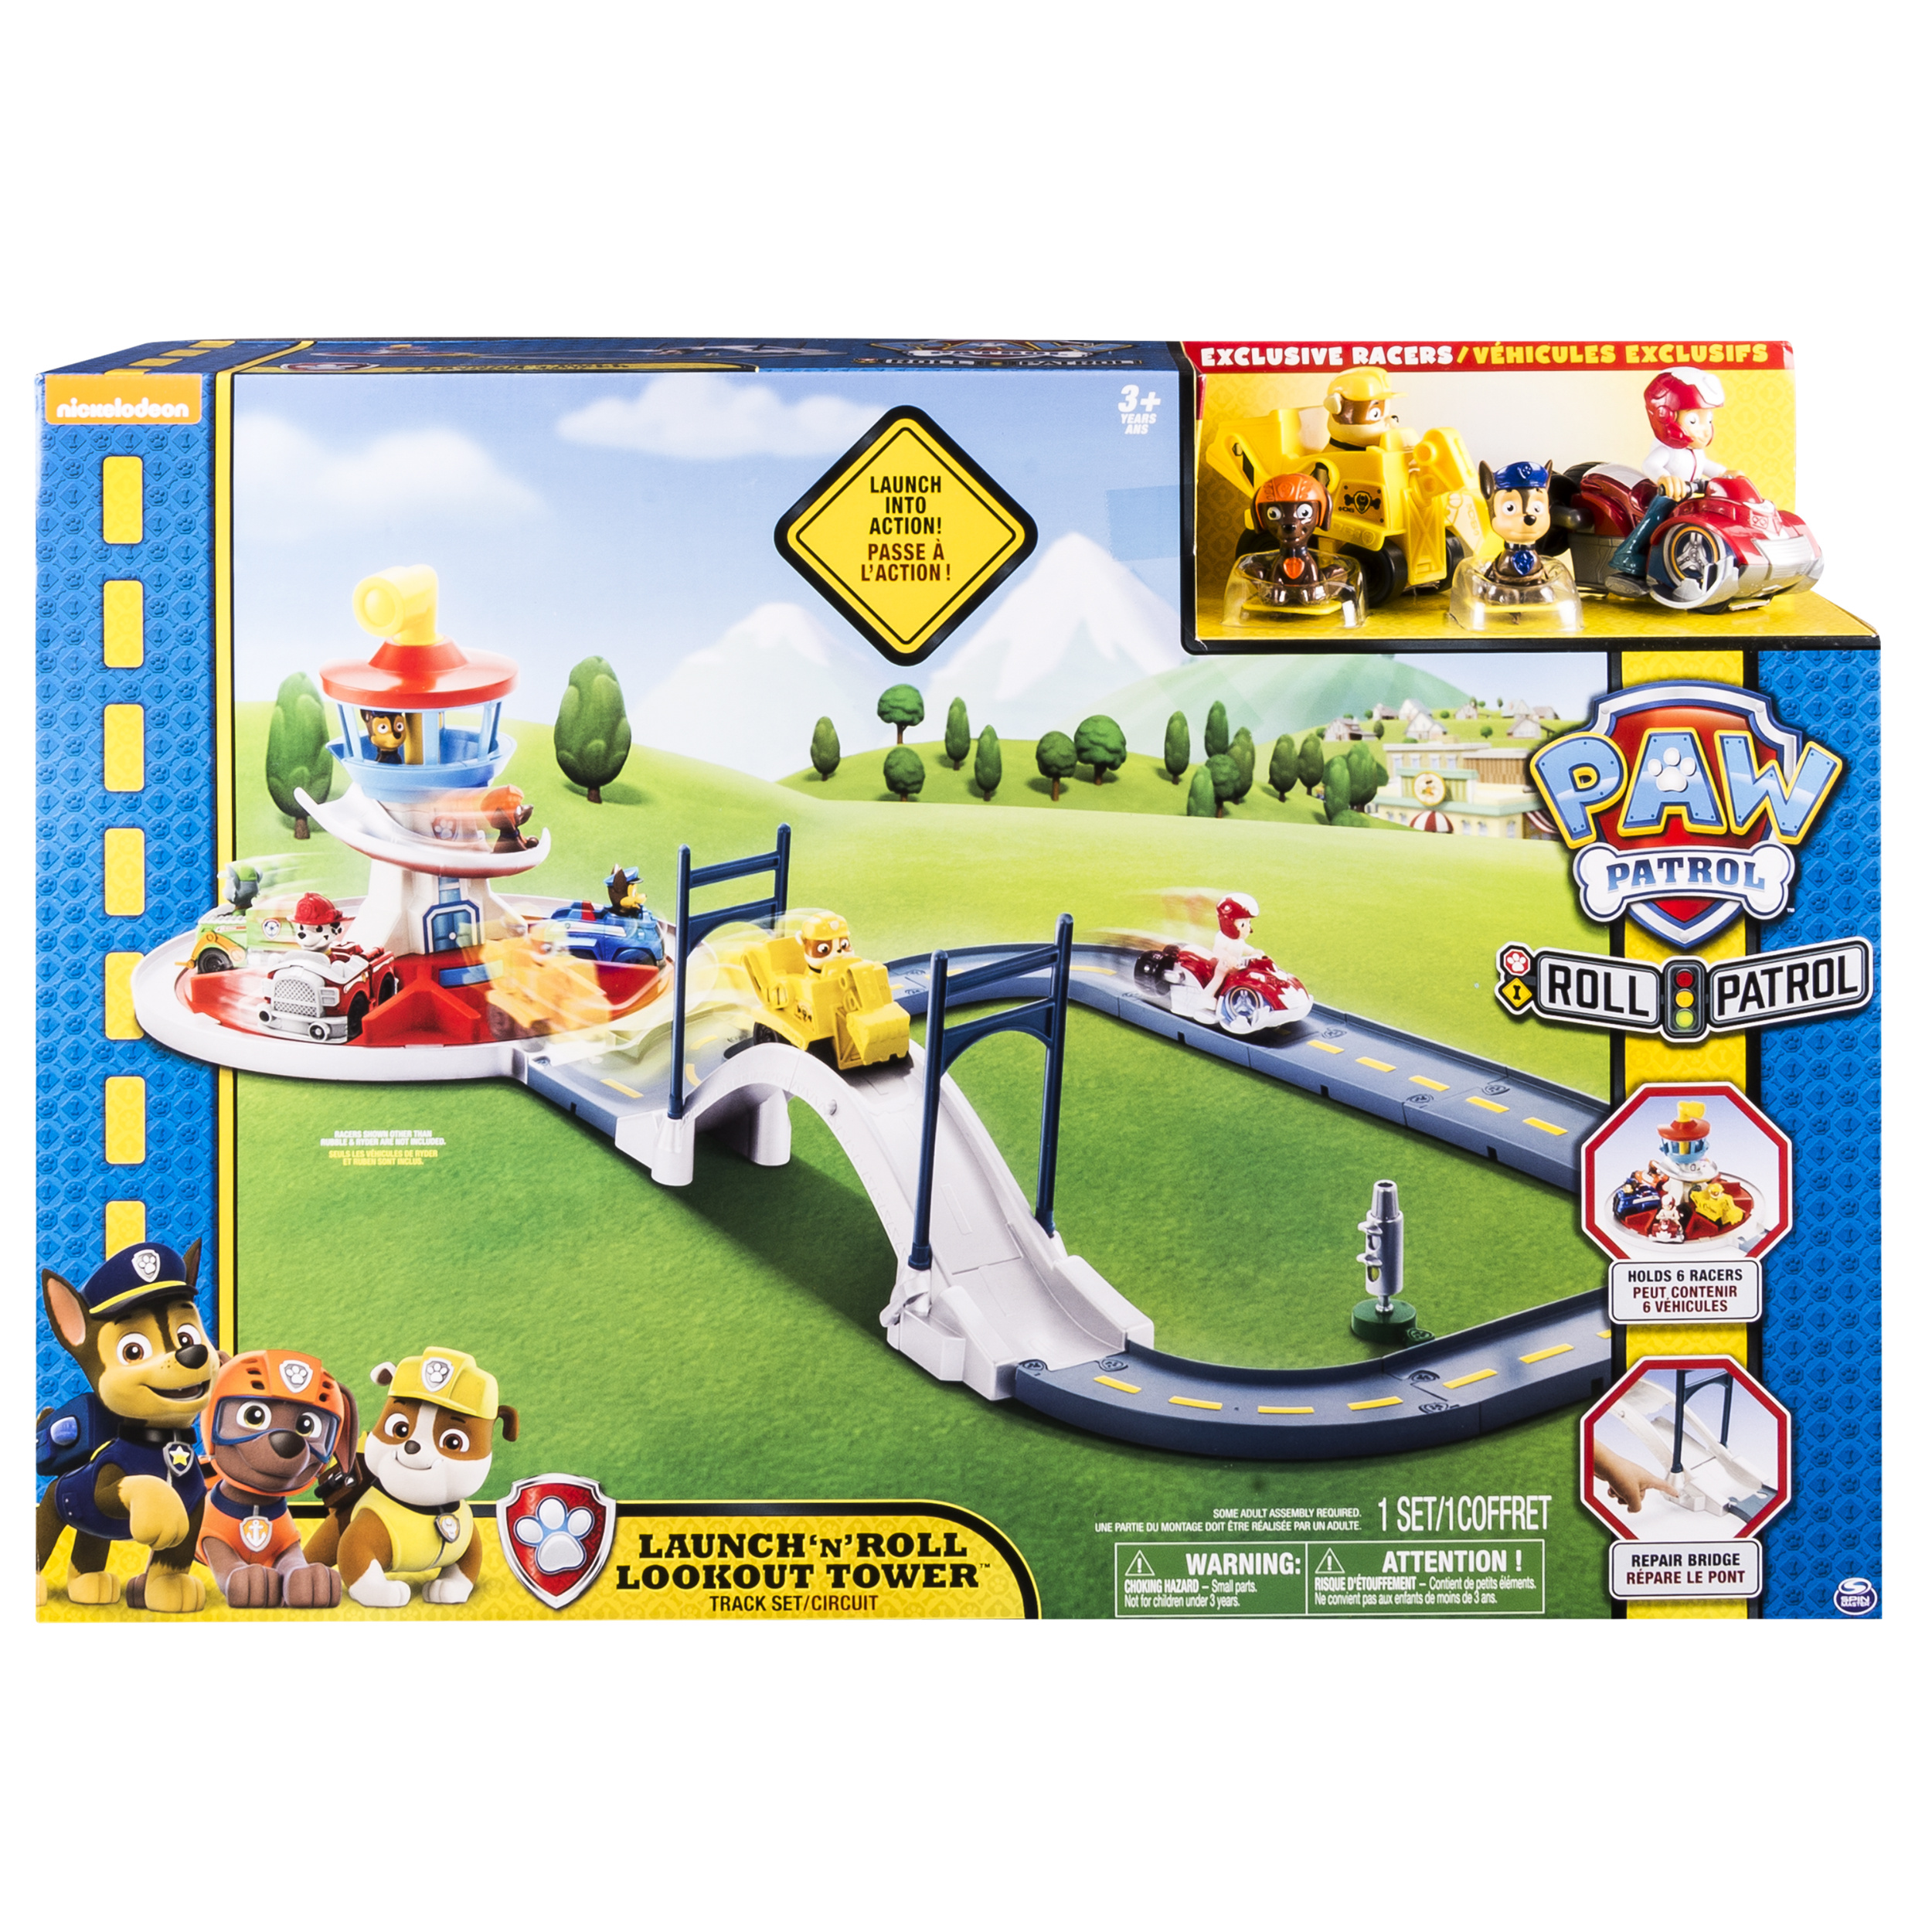 Paw Patrol - Launch N Roll Lookout Tower Track Set - image 5 of 8